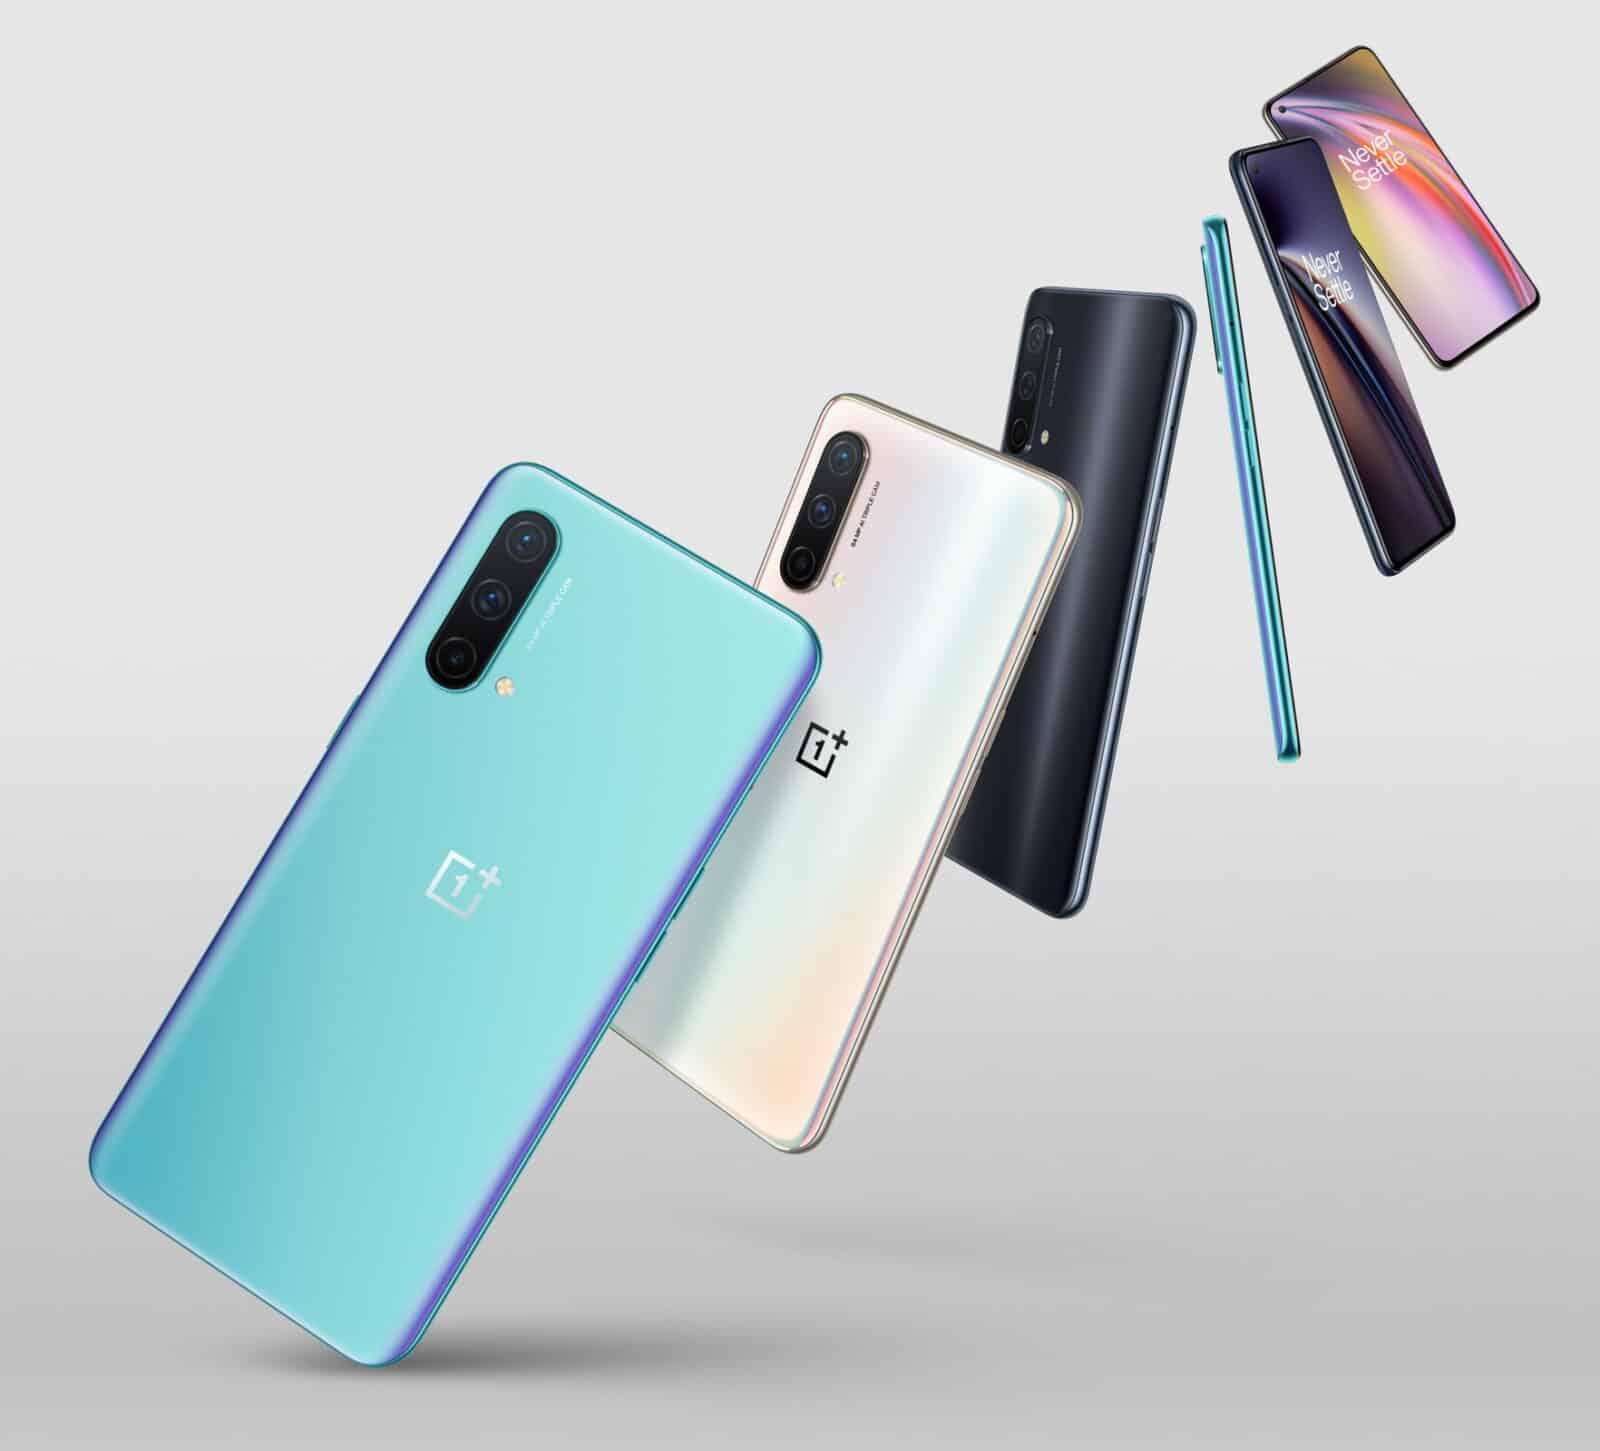 oneplus-3-ans-mises-a-jour-securite-android